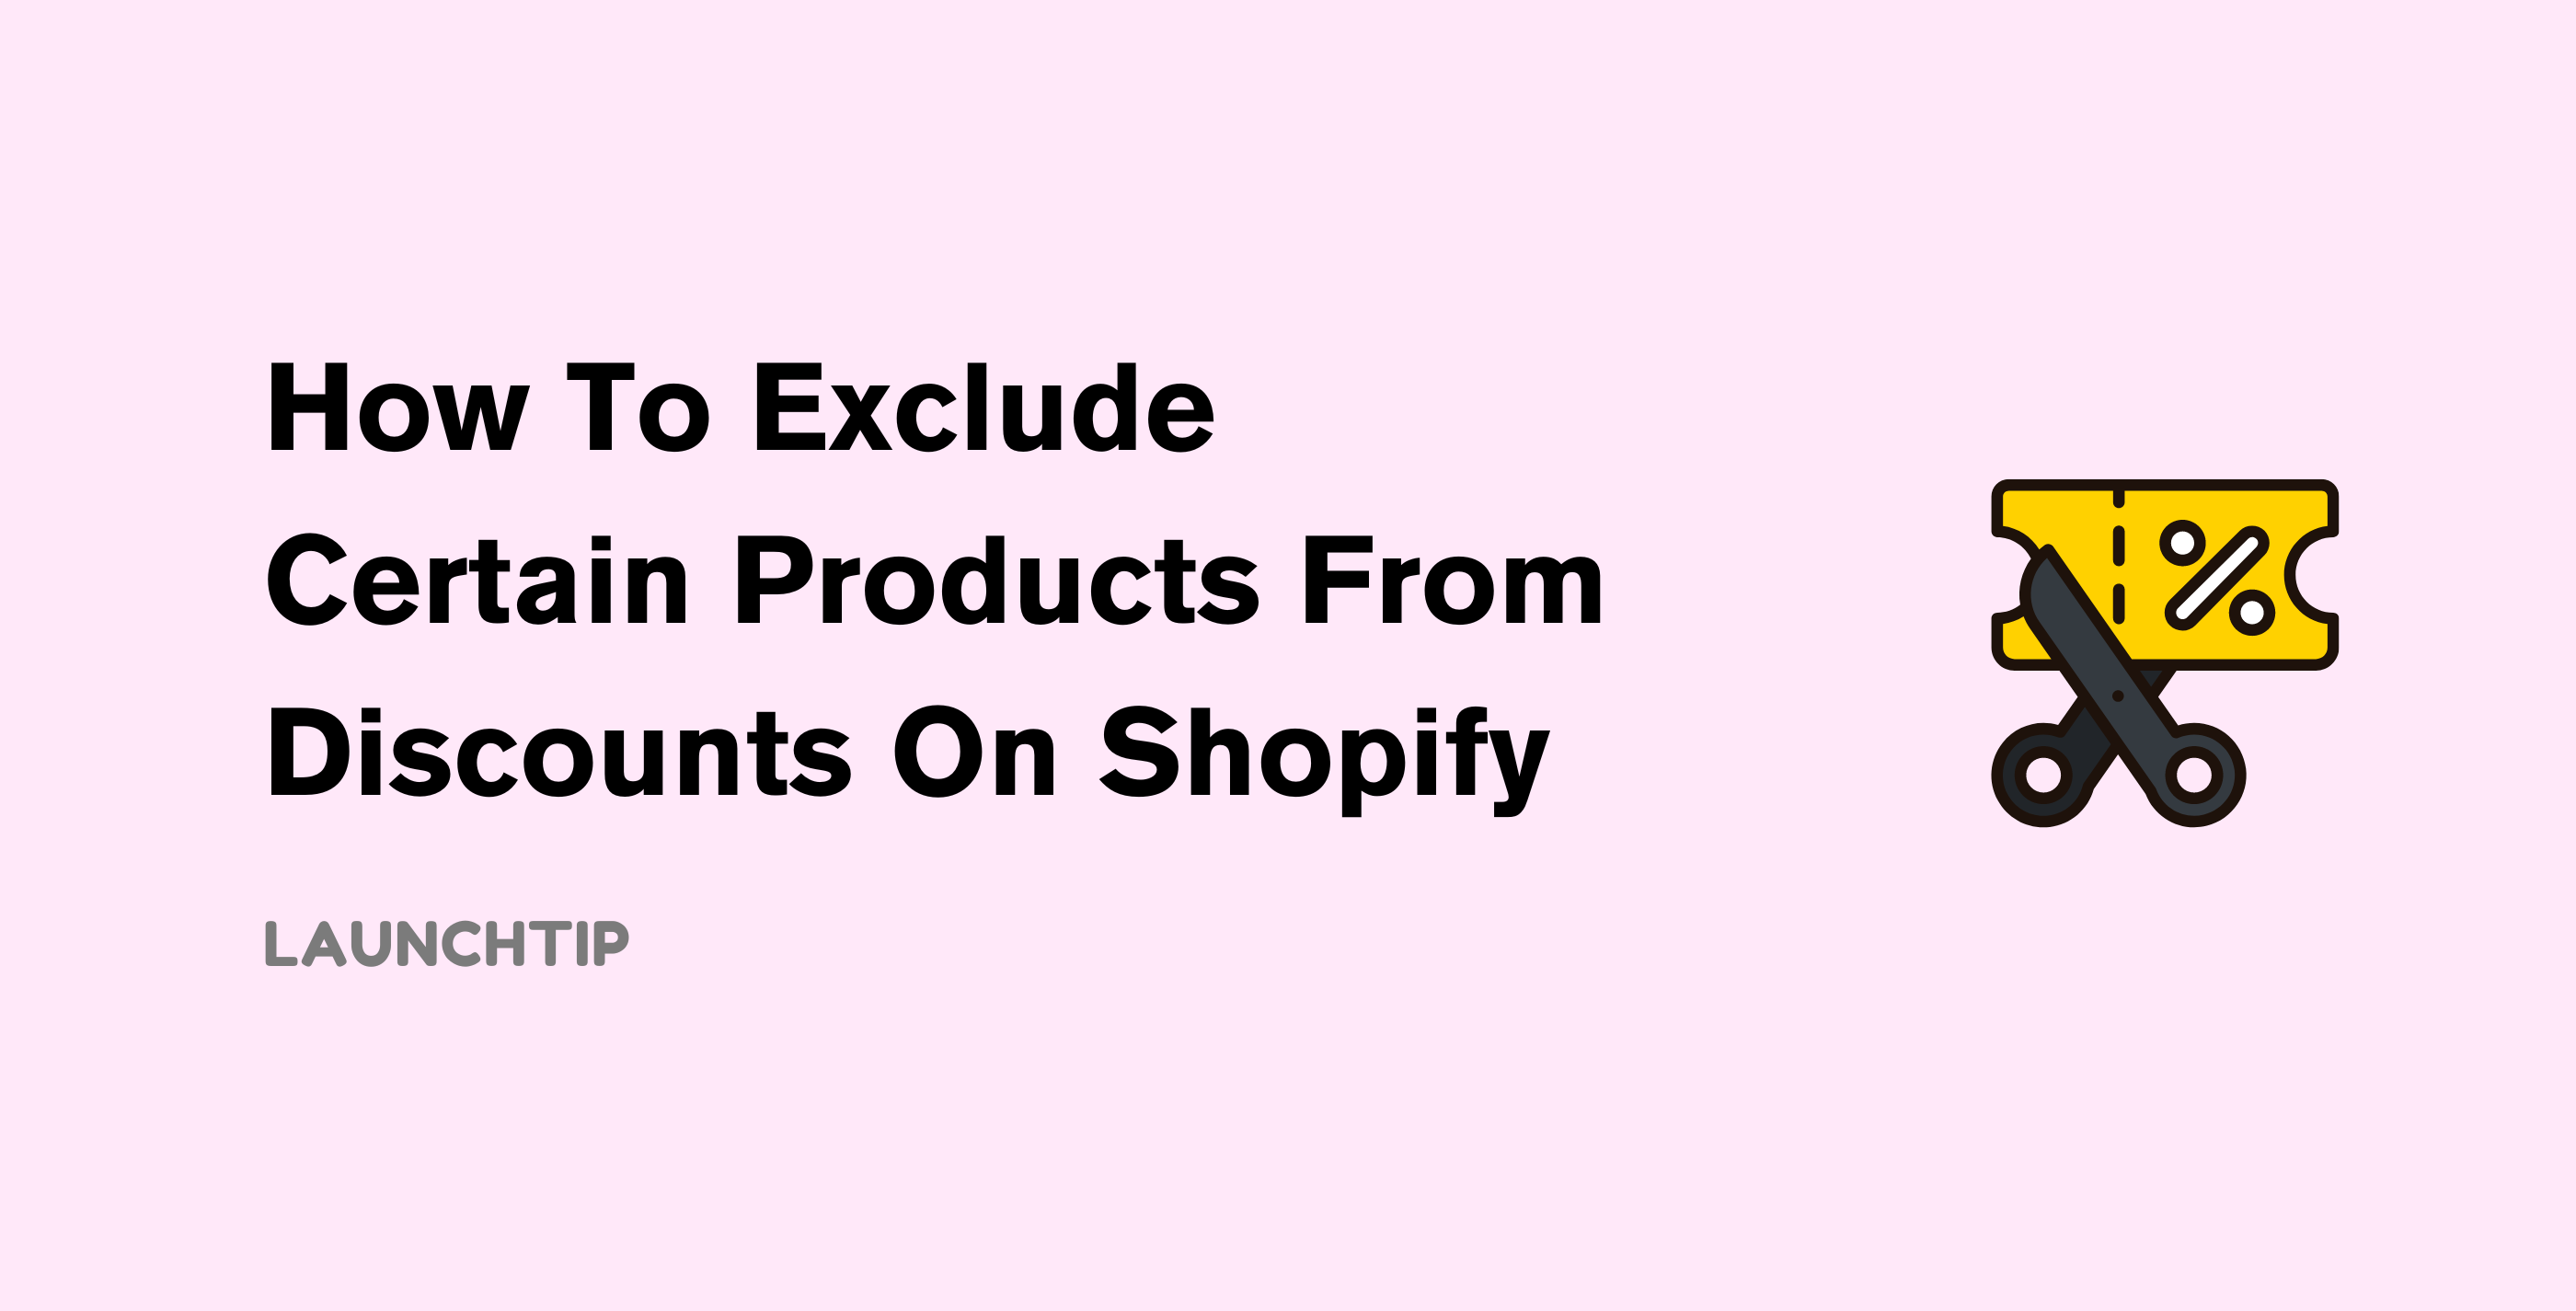 Exclude Certain Products